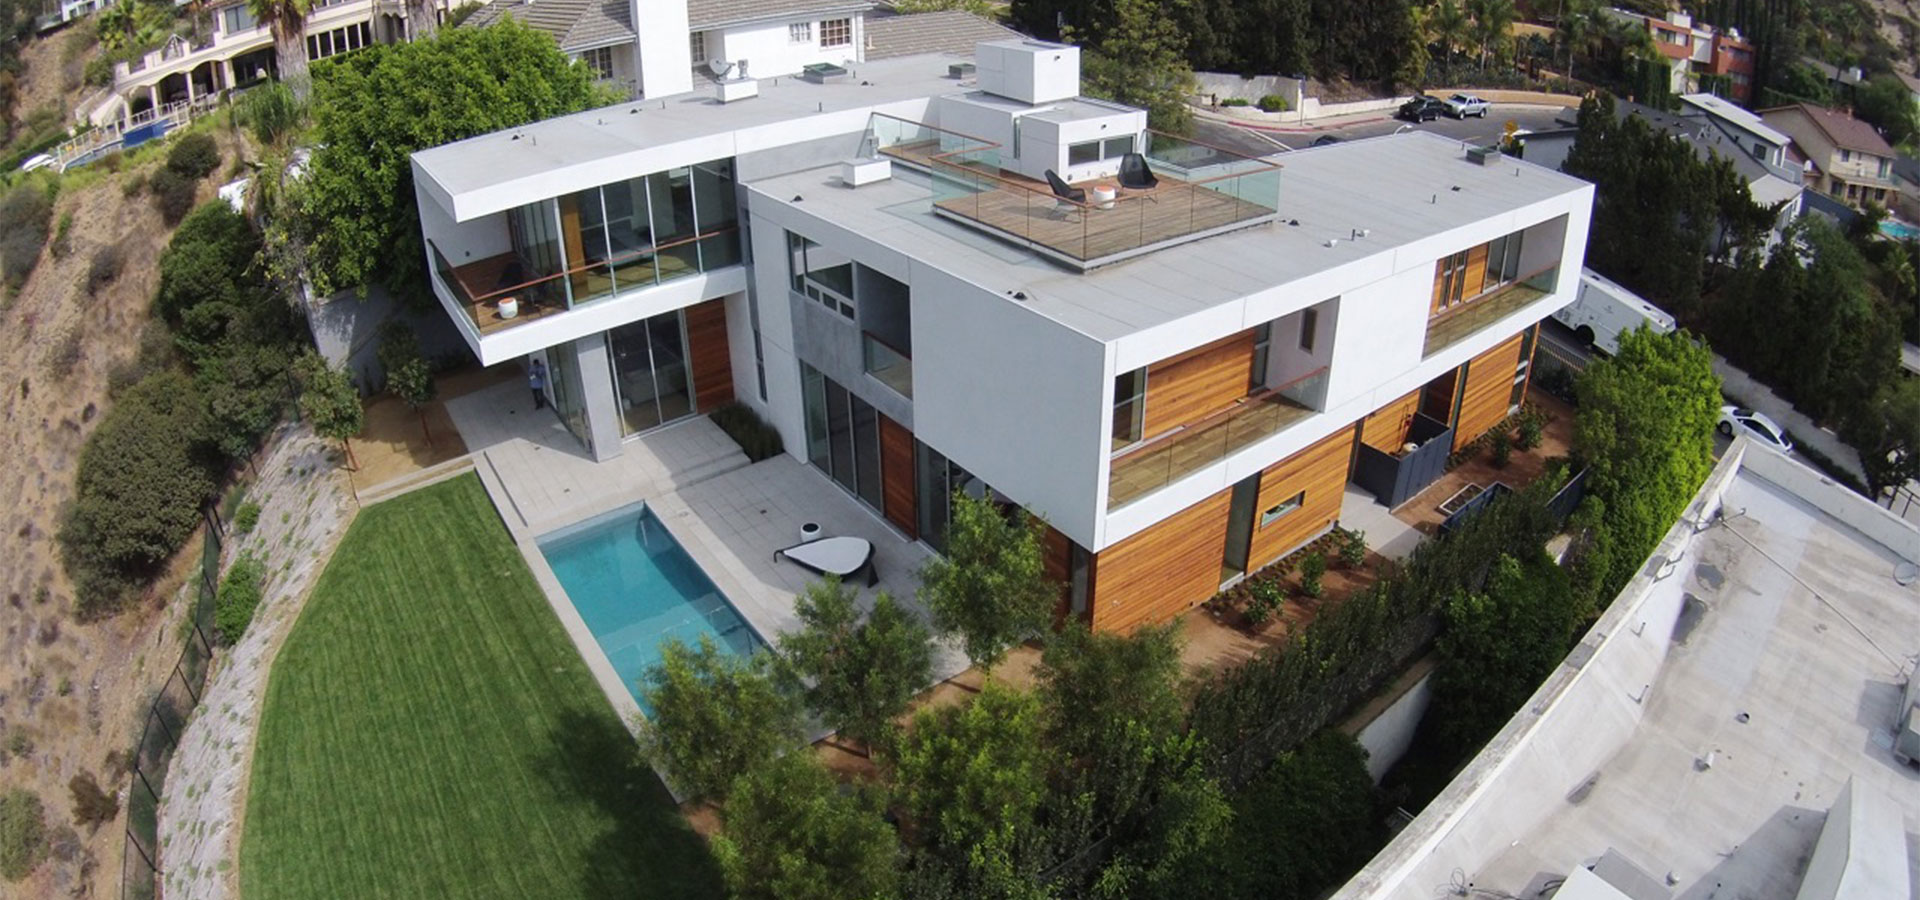 Aerial view of the Mount Olympus Residence, a modern home perched on the edge of Laurel Canyon